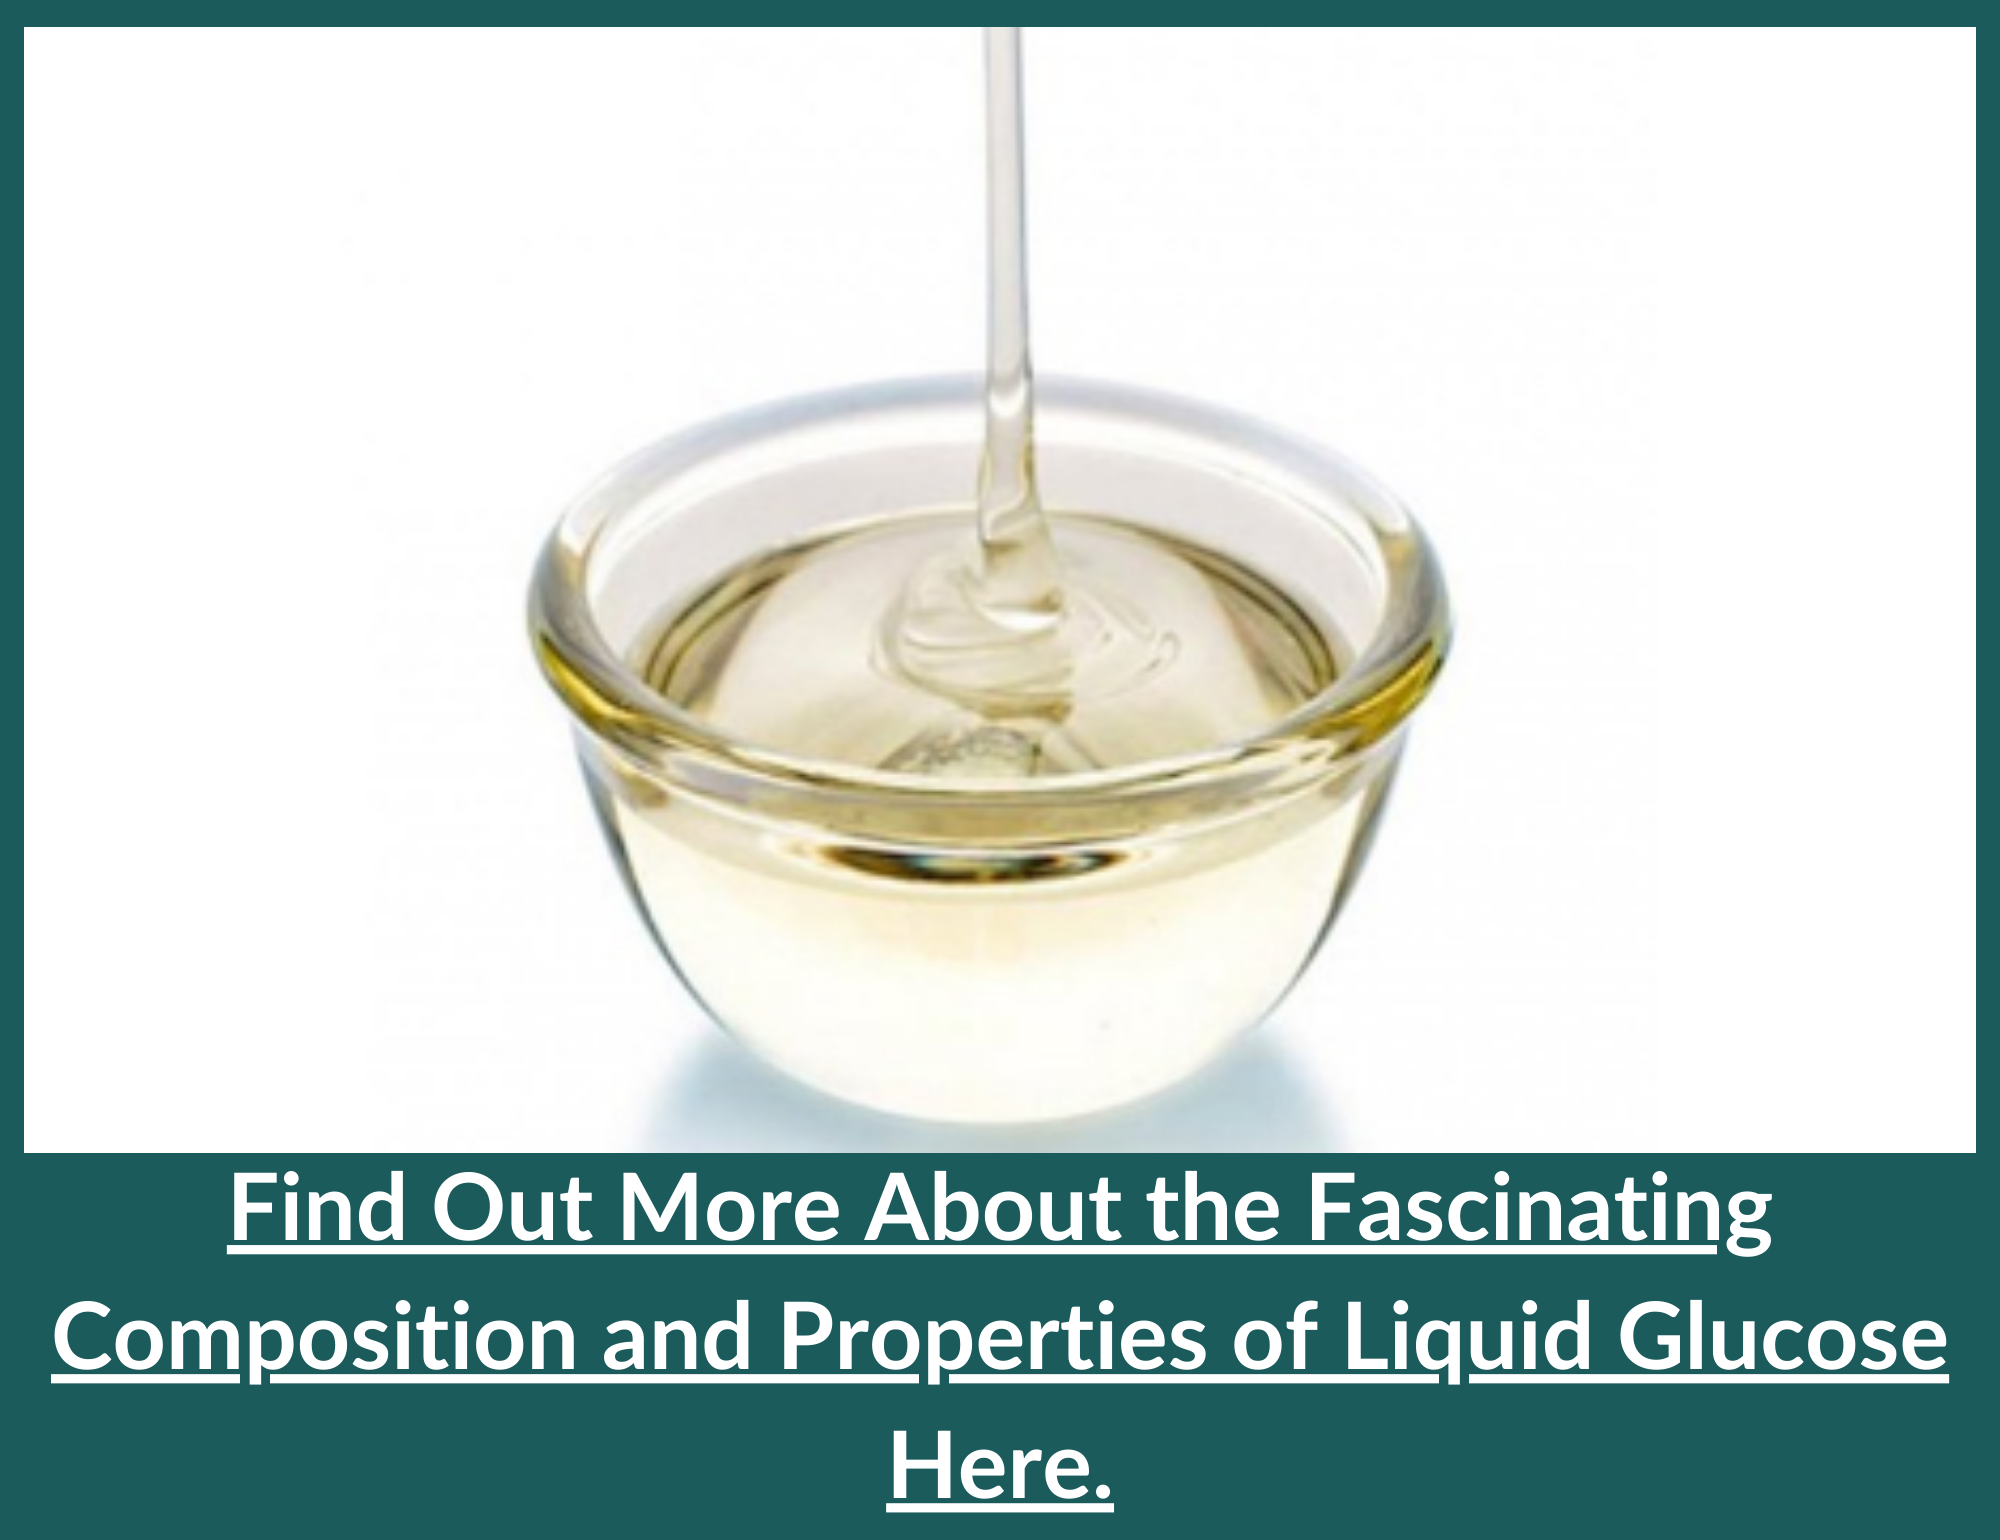 Composition and Properties of Liquid Glucose